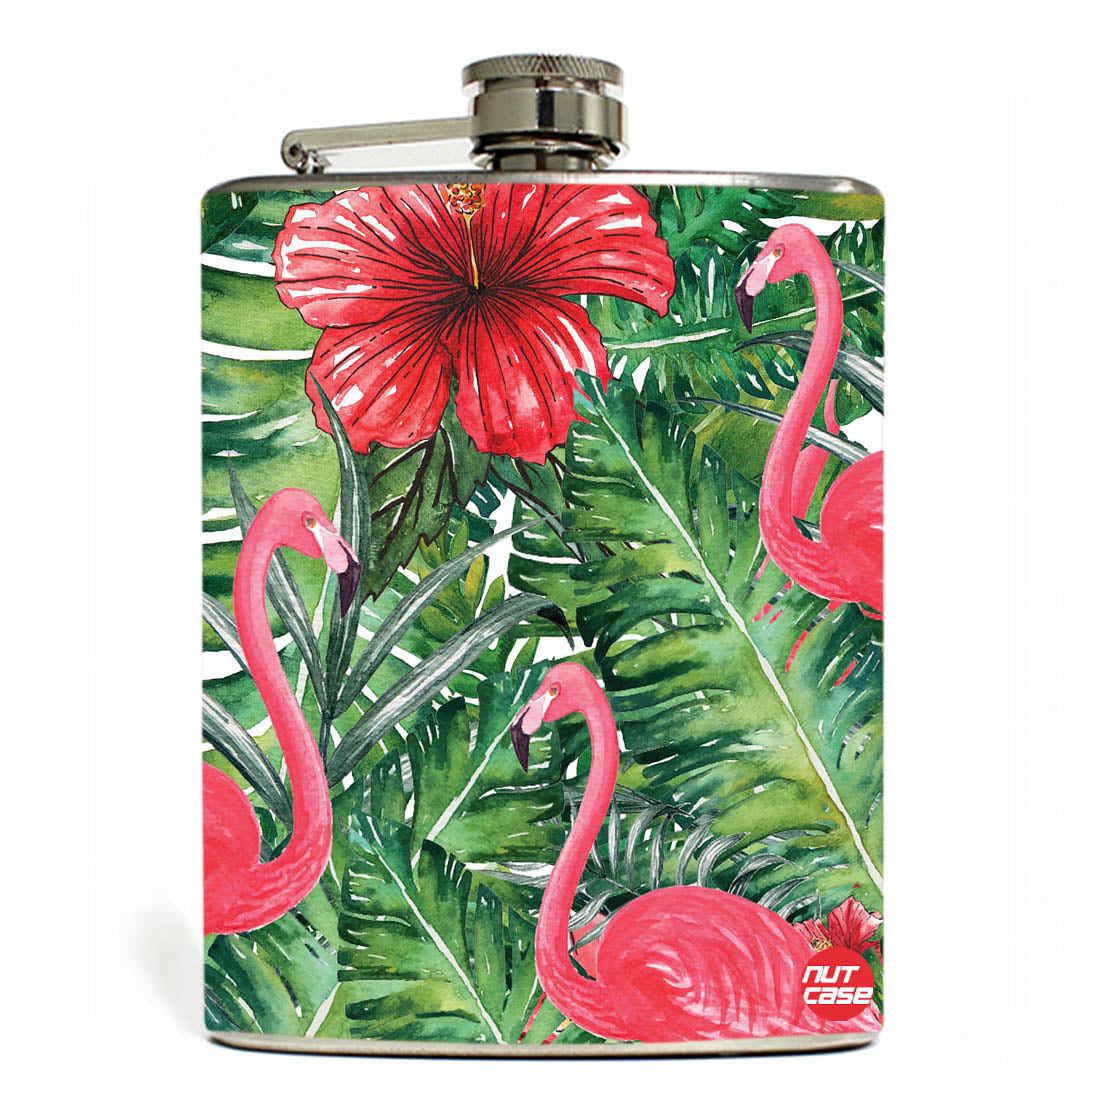 Hip Flask - Hibiscus Flower With Flamingo Nutcase